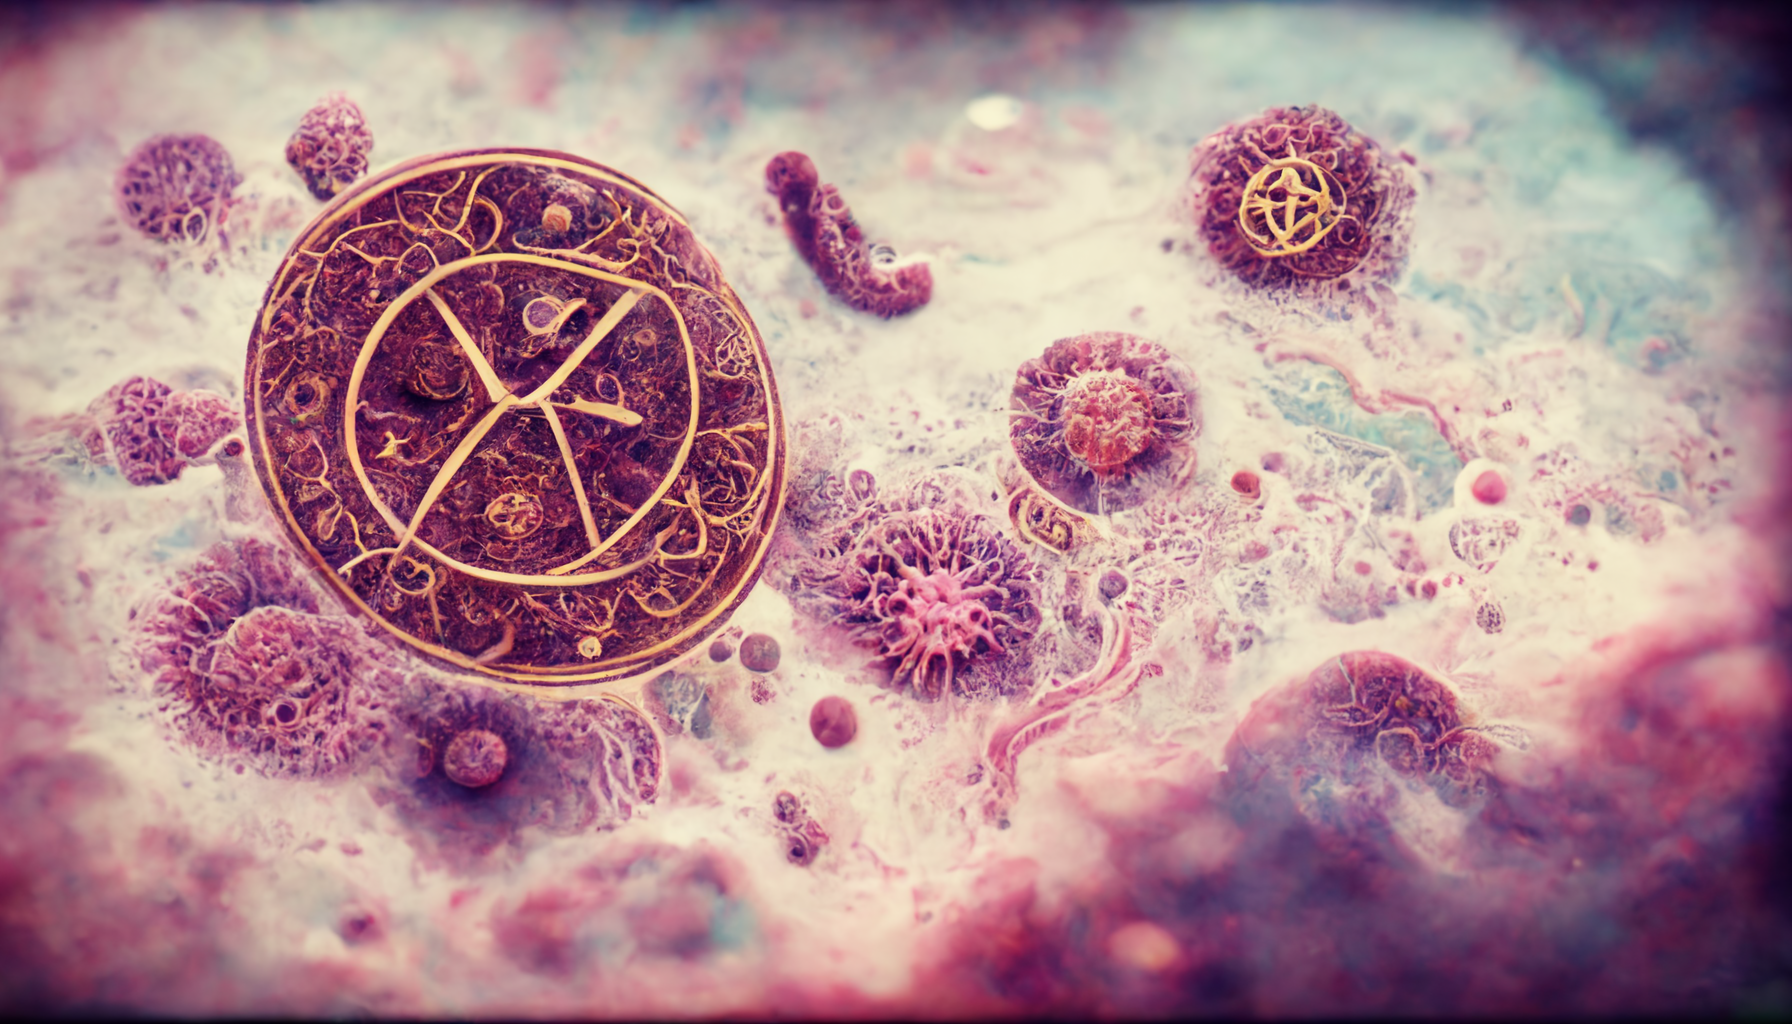 In impressionistic illustration of microscopic disease with zodiac elements